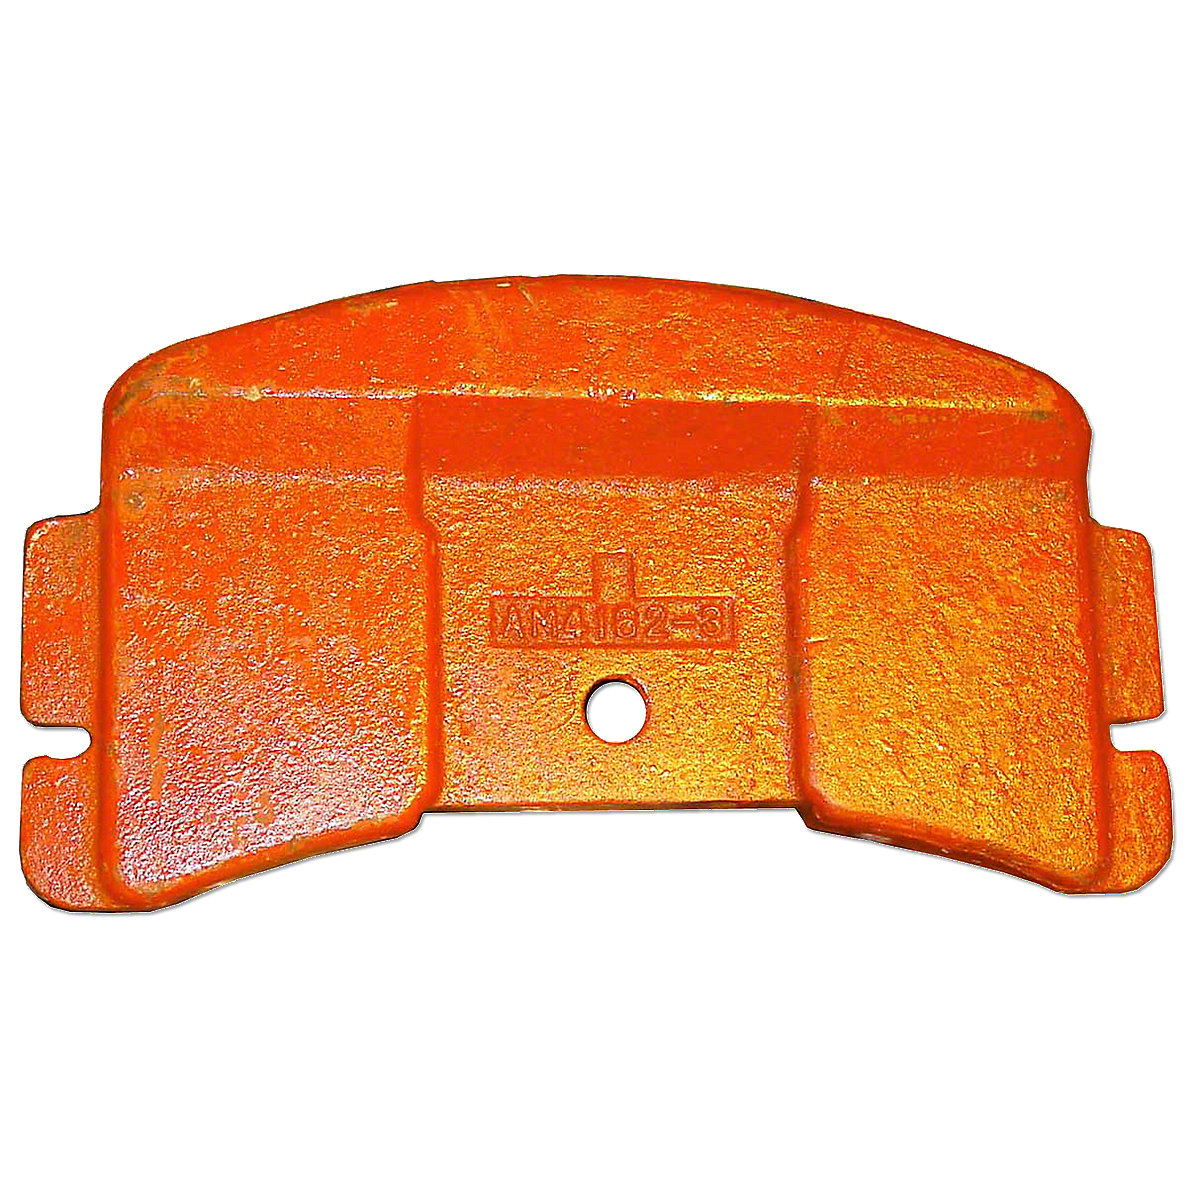 Front End Weight For Allis Chalmers: D15, D17, D19, RC, WC, WD, WD45, WF.